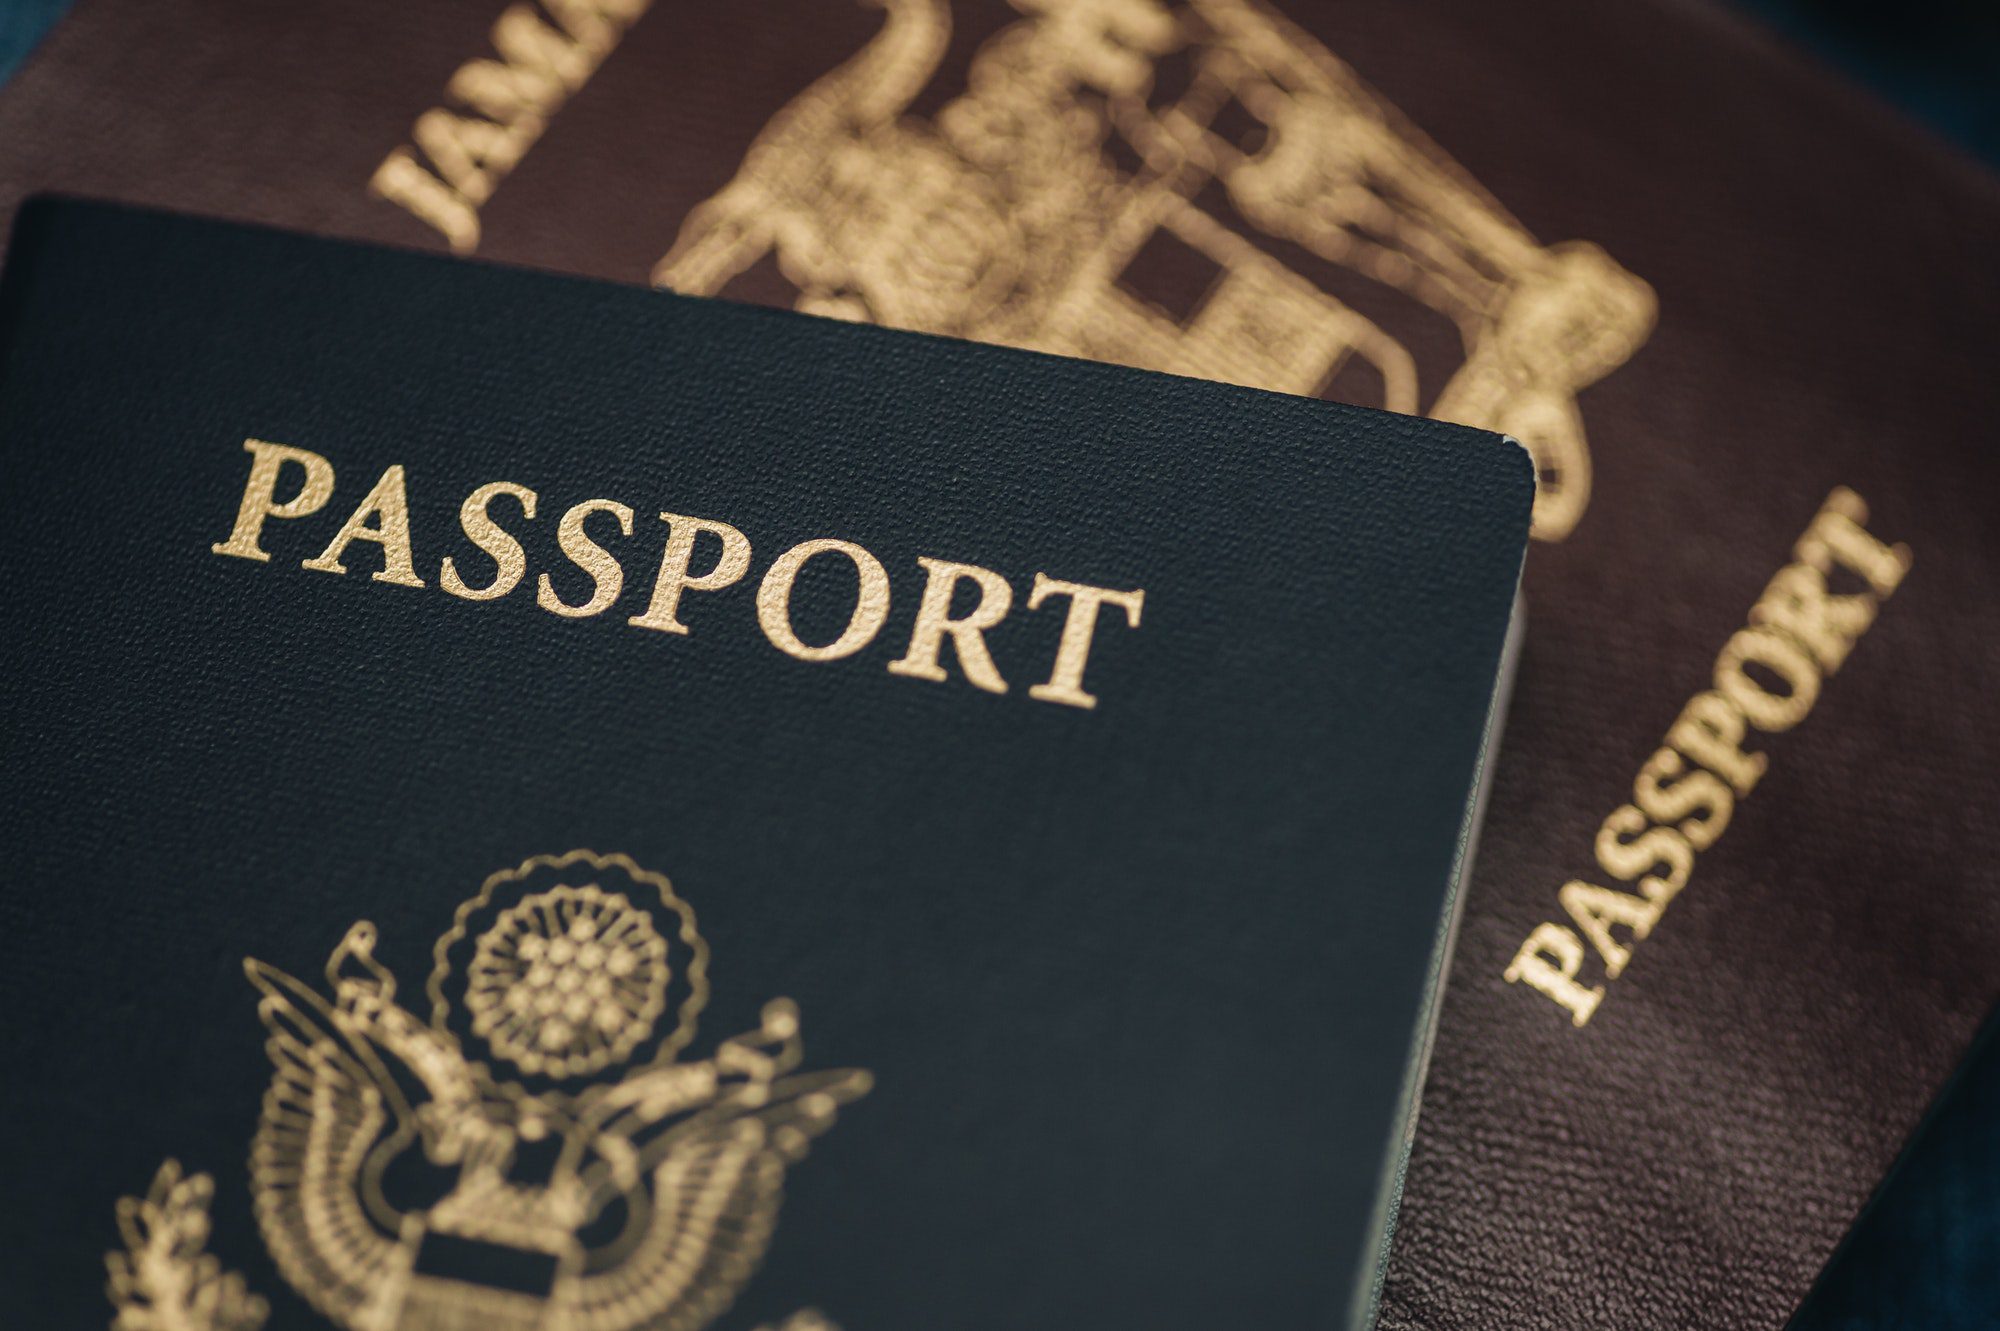 Passport used by seniors to travel outside of the country where their medicare may or may not cover healthcare.